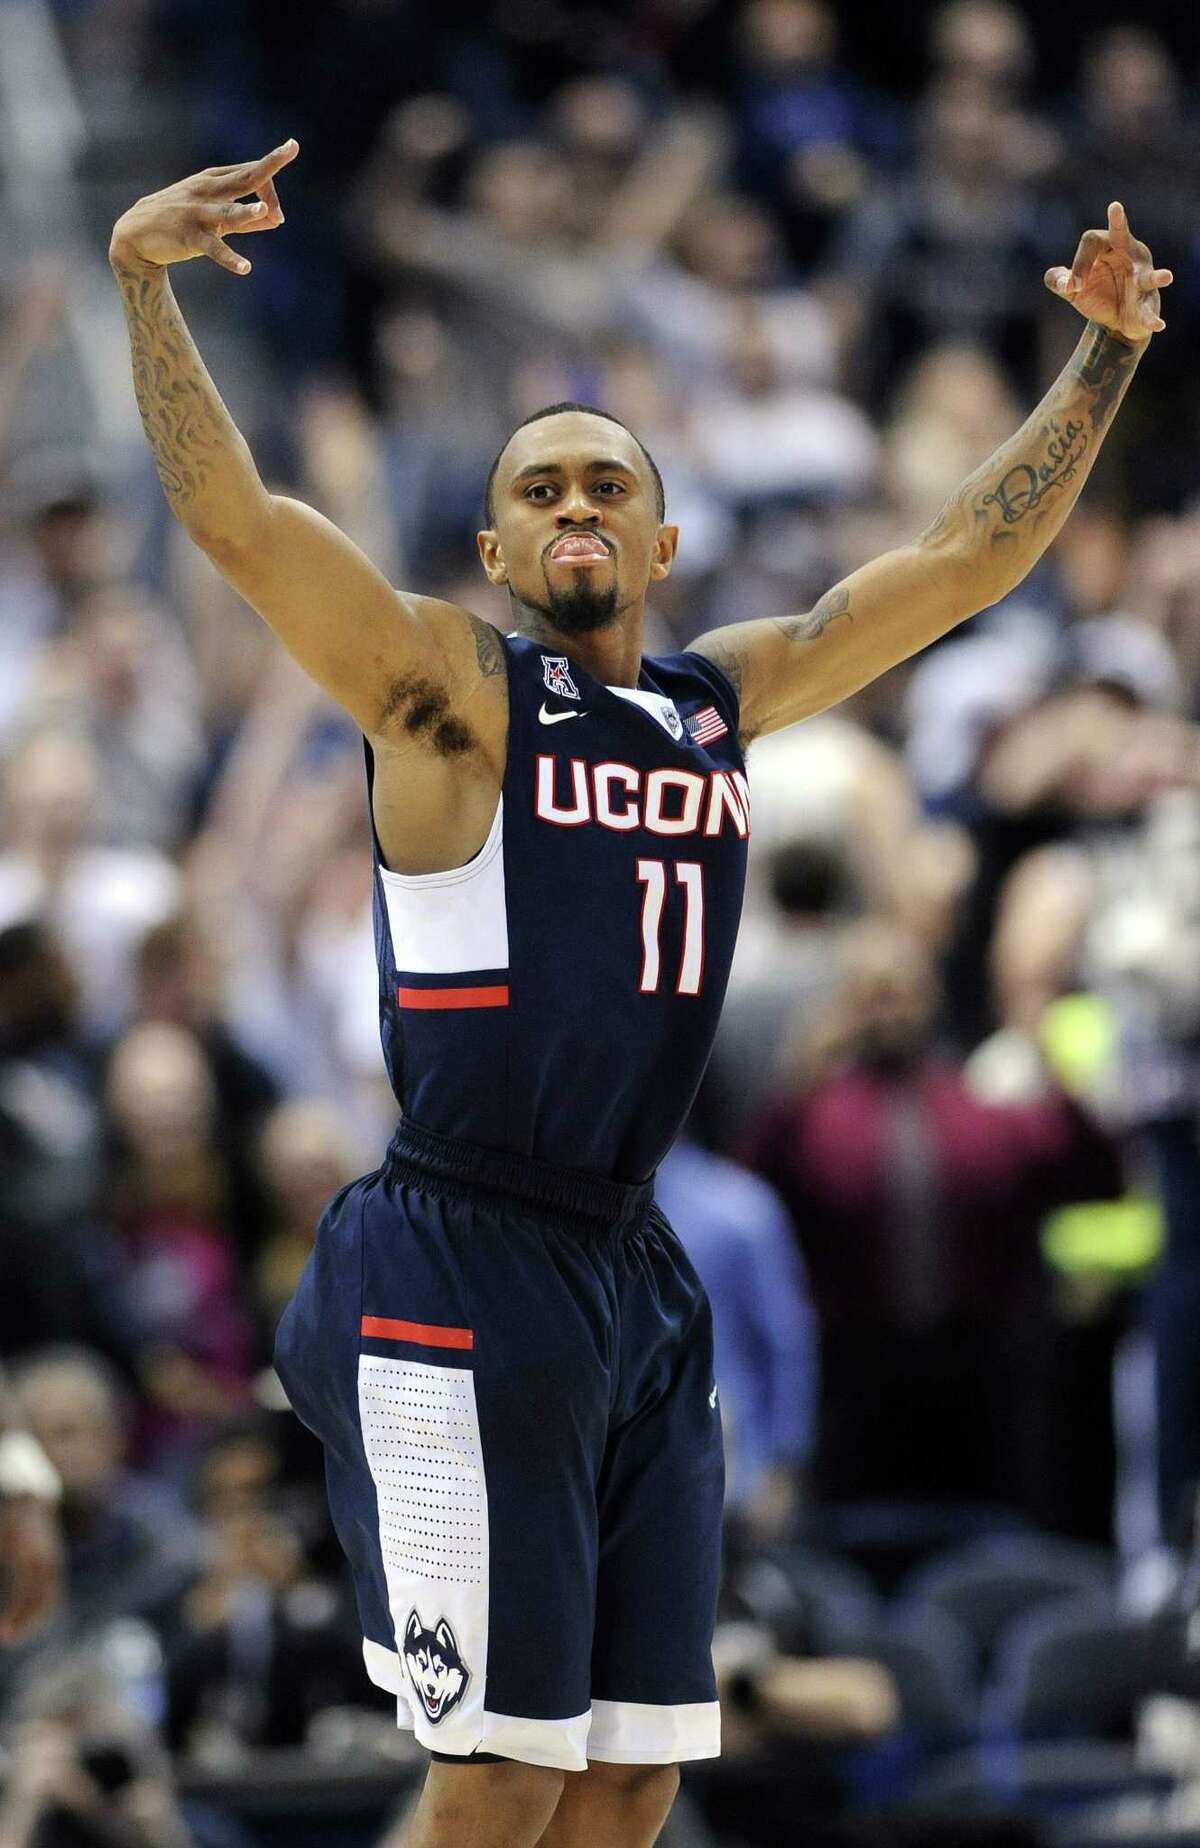 UConn’s Ryan Boatright celebrates after hitting a 3-pointer to tie the game during the second half of the American Athletic Conference semifinals on Saturday in Hartford. The Huskies won 47-42.